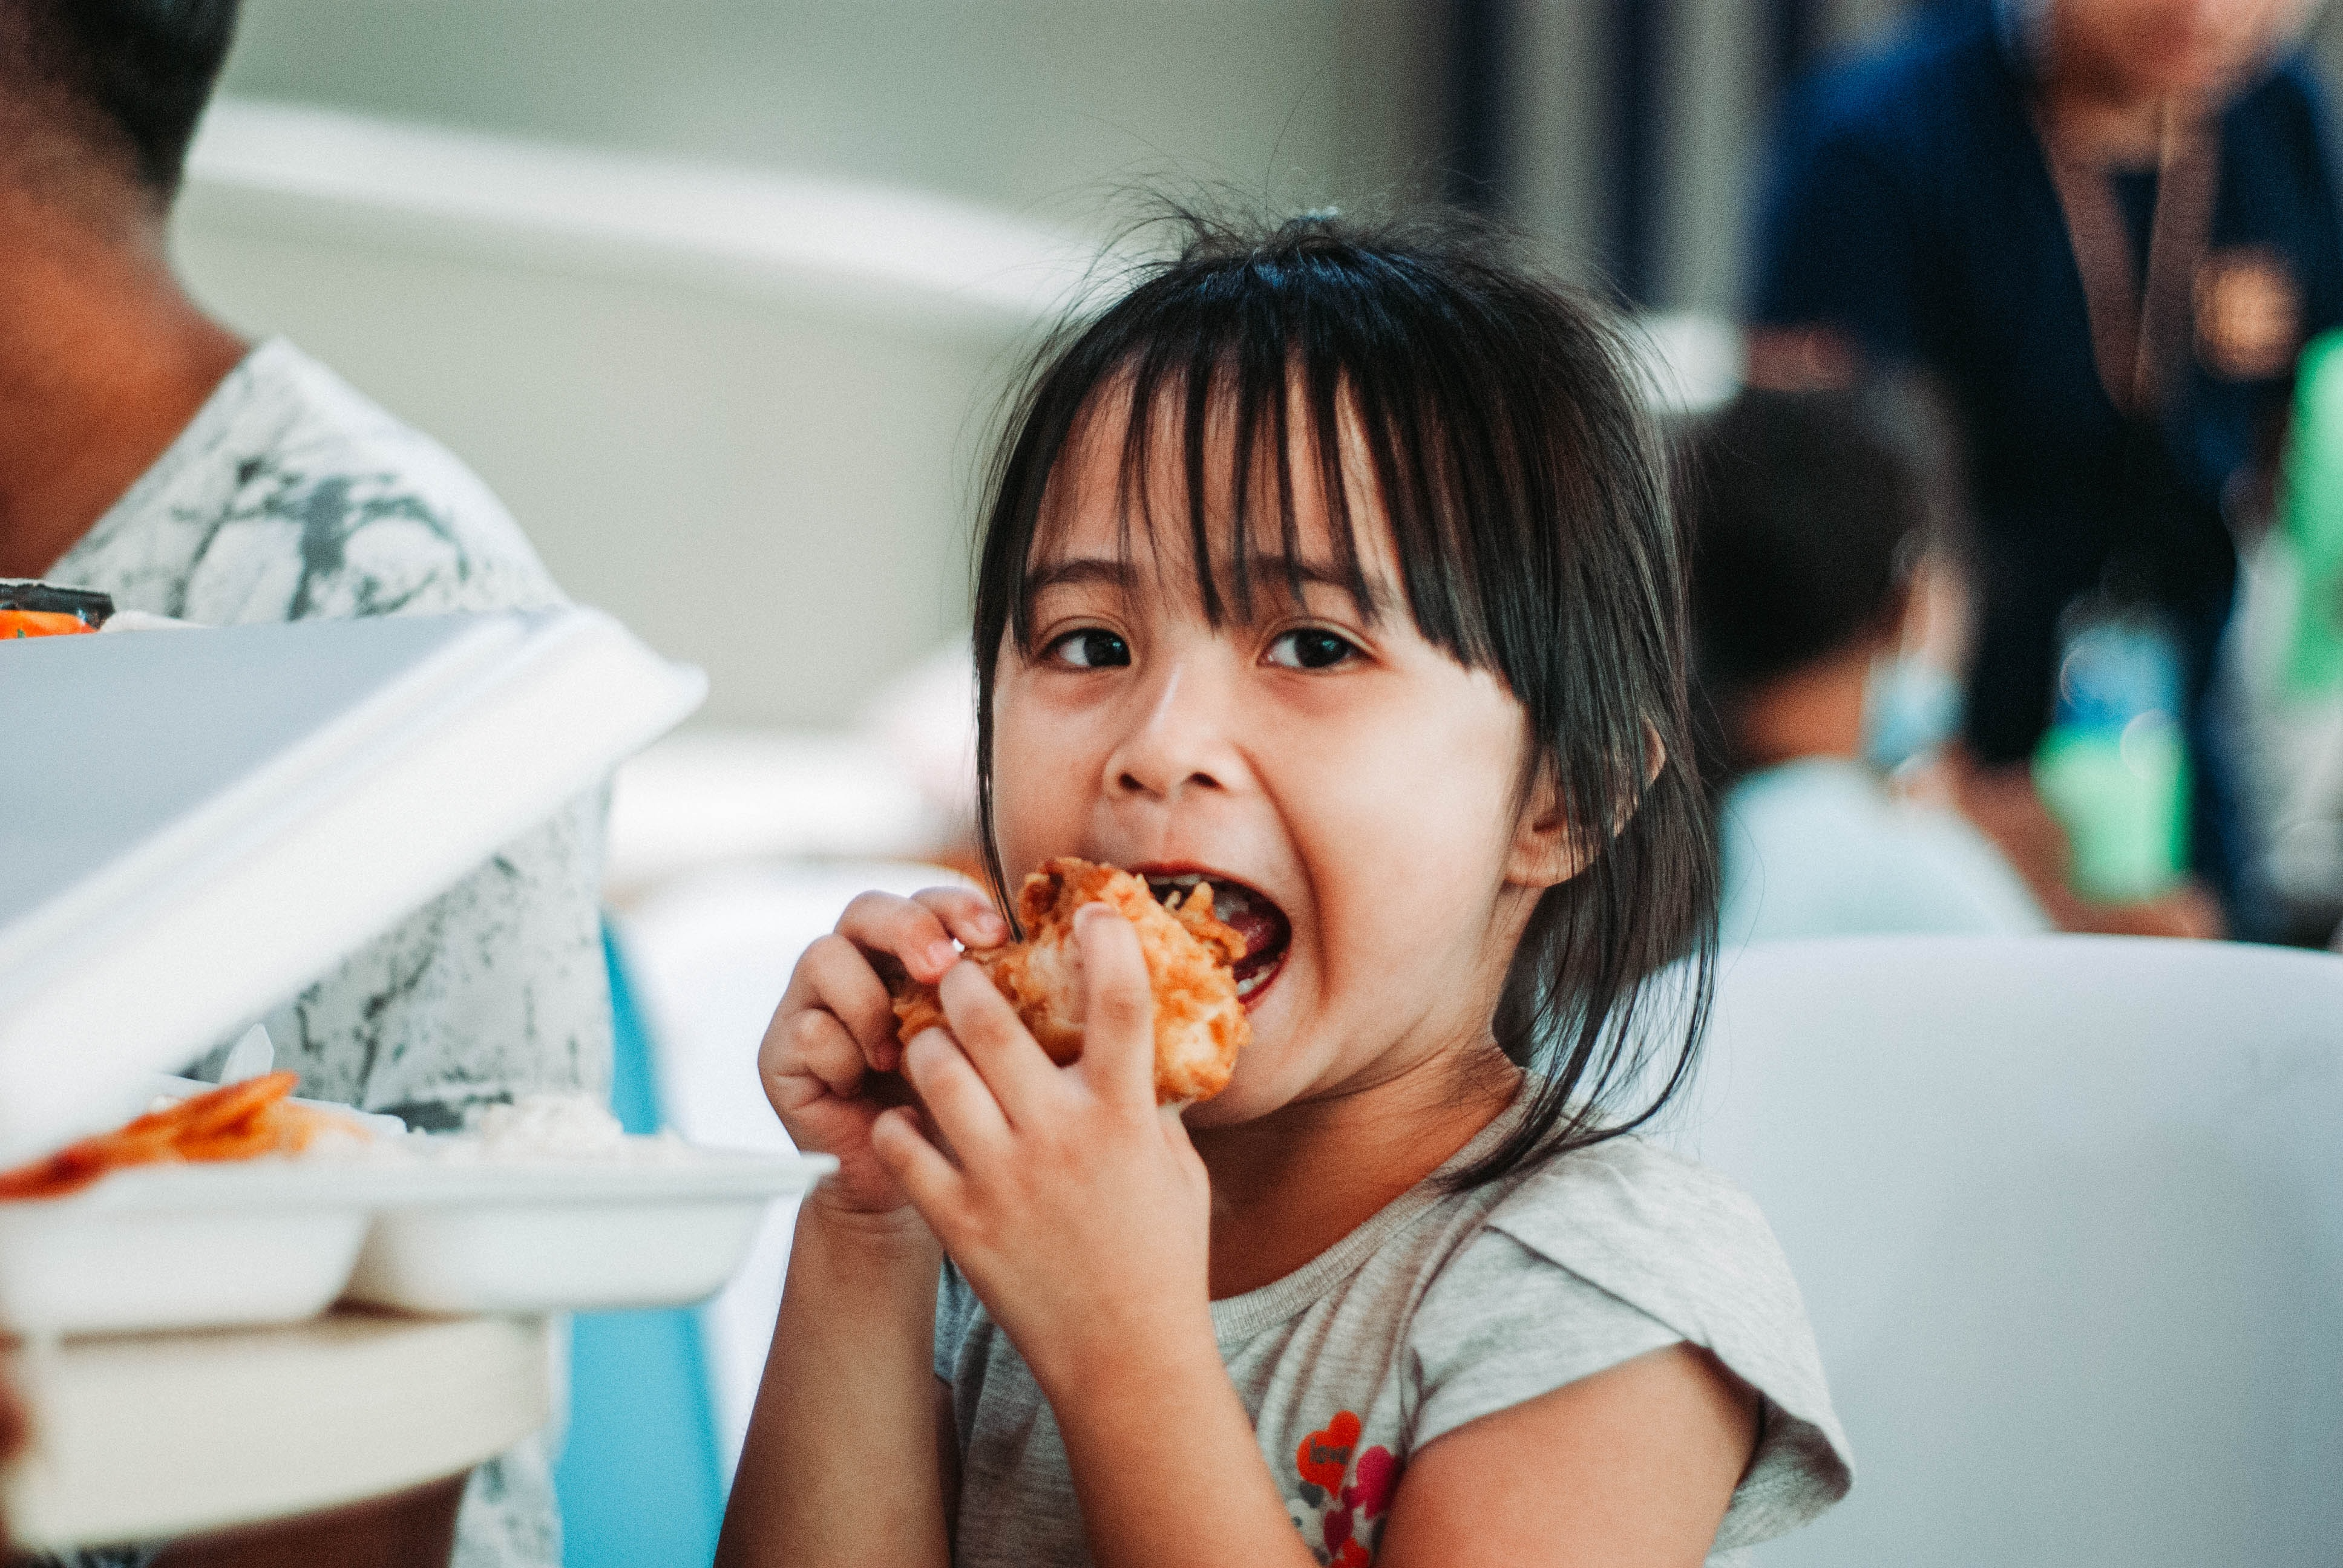 Eating a nutritious meal helps children learn